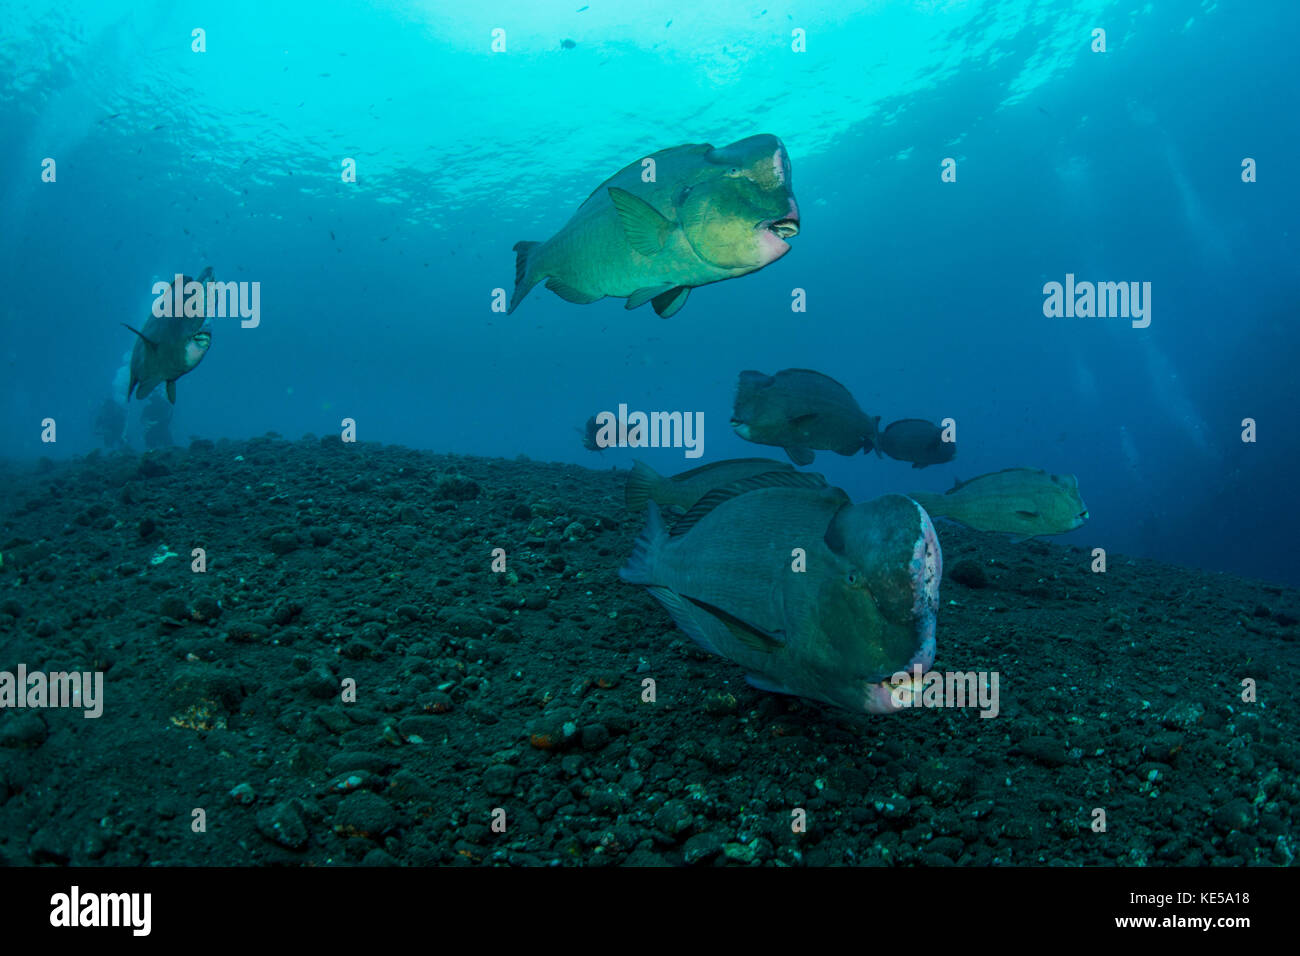 Several bumphead parrotfish swimming over black sand near the Liberty Wreck in Indonesia. Stock Photo